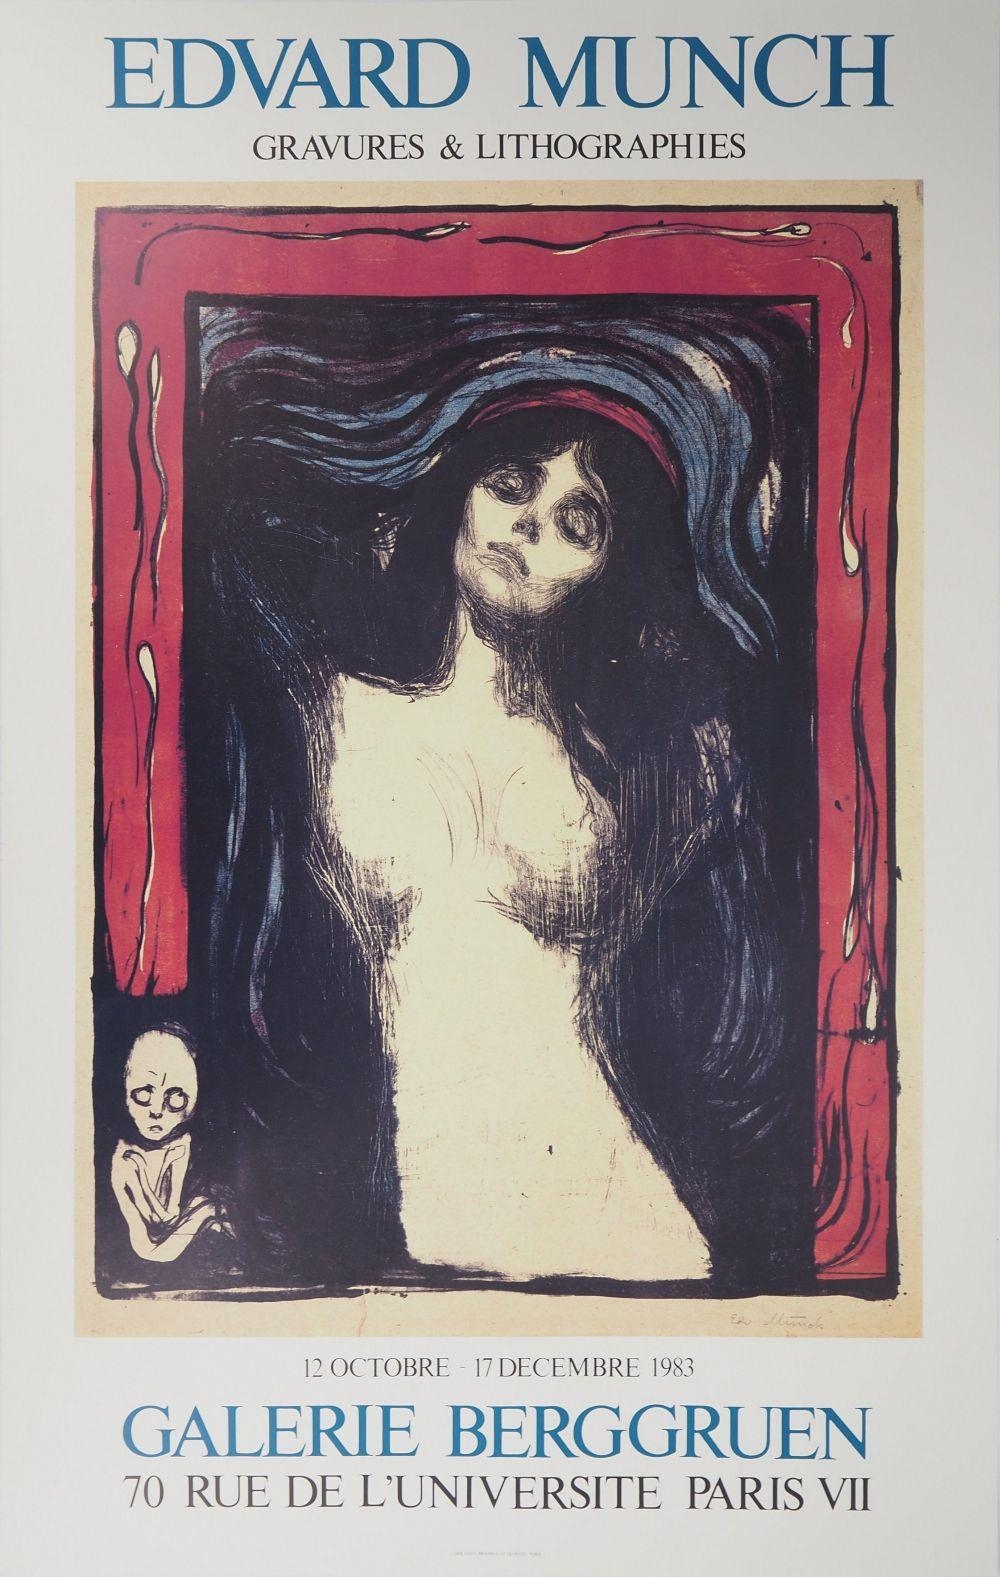 Artwork by Edvard Munch, Madonna, Made of Original vintage poster (high quality four-color process) On thick paper